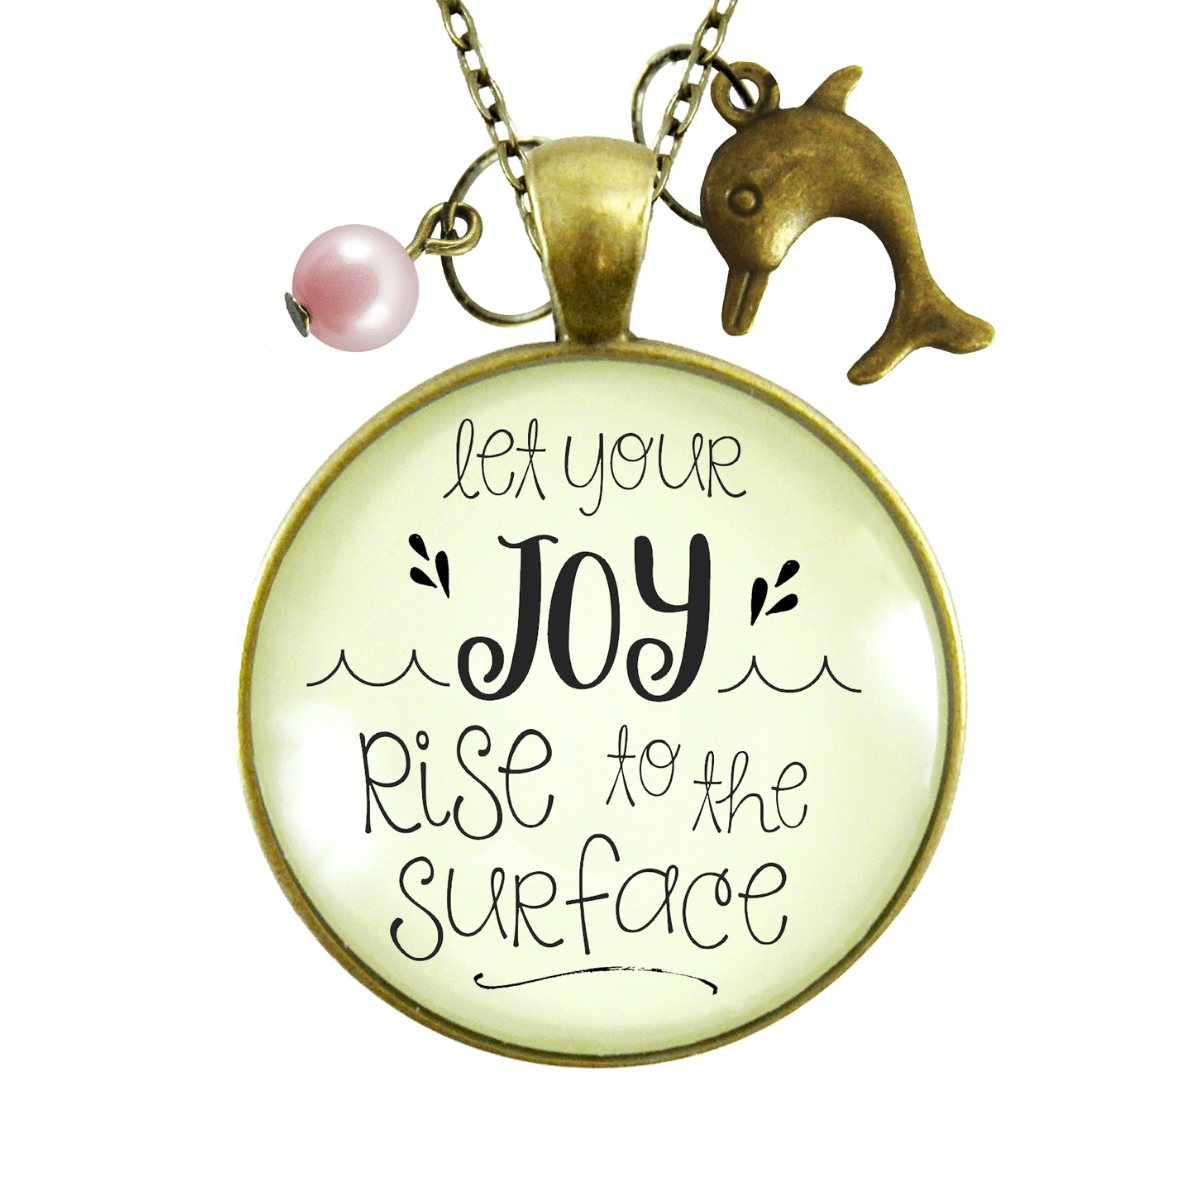 Gutsy Goodness Let Joy Rise to Surface Dolphin Necklace Charm Pink Bead Jewelry - Gutsy Goodness Handmade Jewelry;Let Joy Rise To Surface Dolphin Necklace Charm Pink Bead Jewelry - Gutsy Goodness Handmade Jewelry Gifts